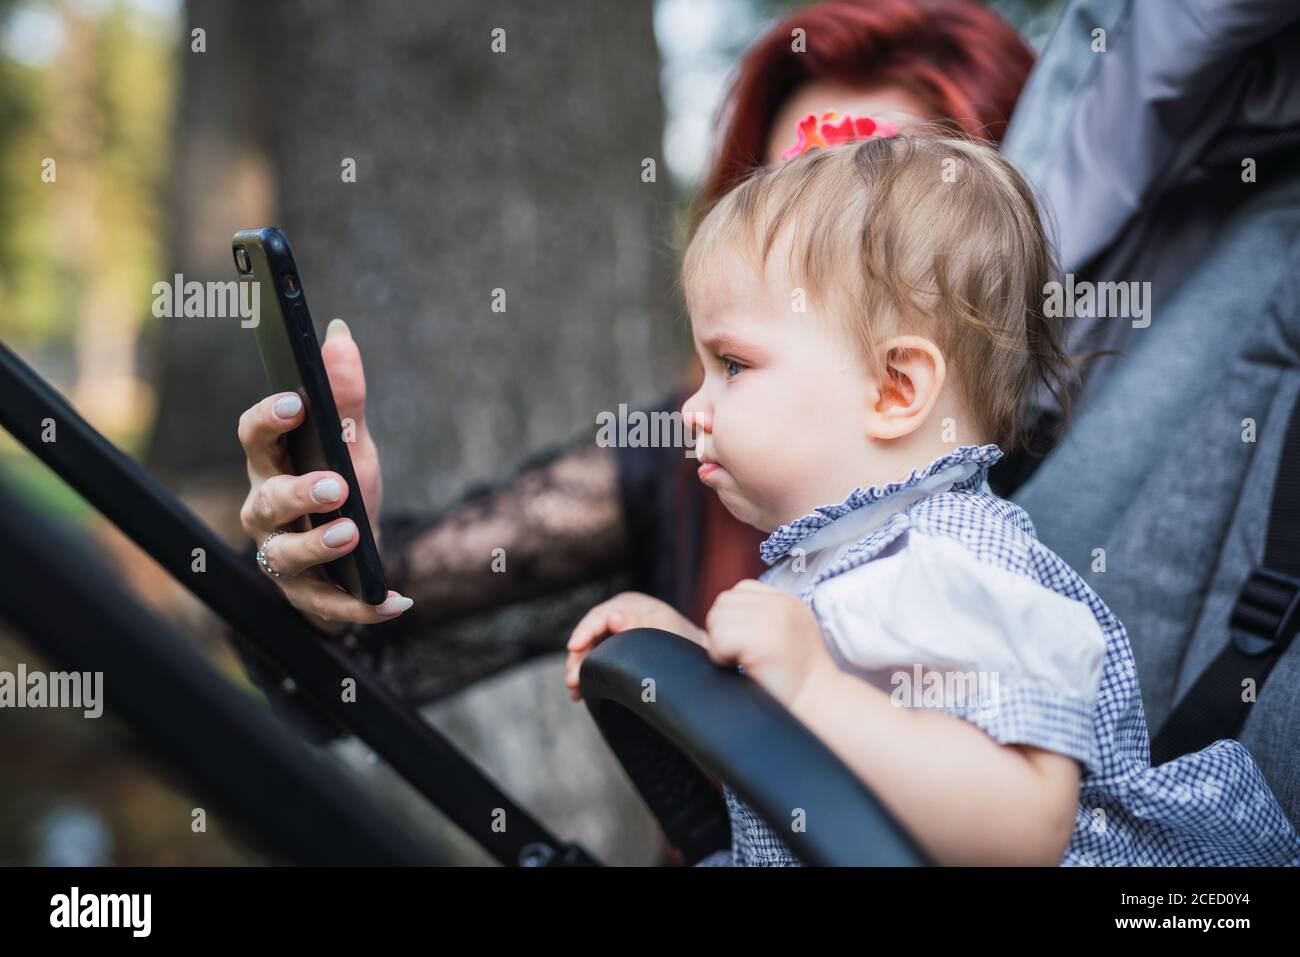 unrecognizable Woman holding modern smartphone and trying to cheer up adorable sad baby girl in stroller Stock Photo